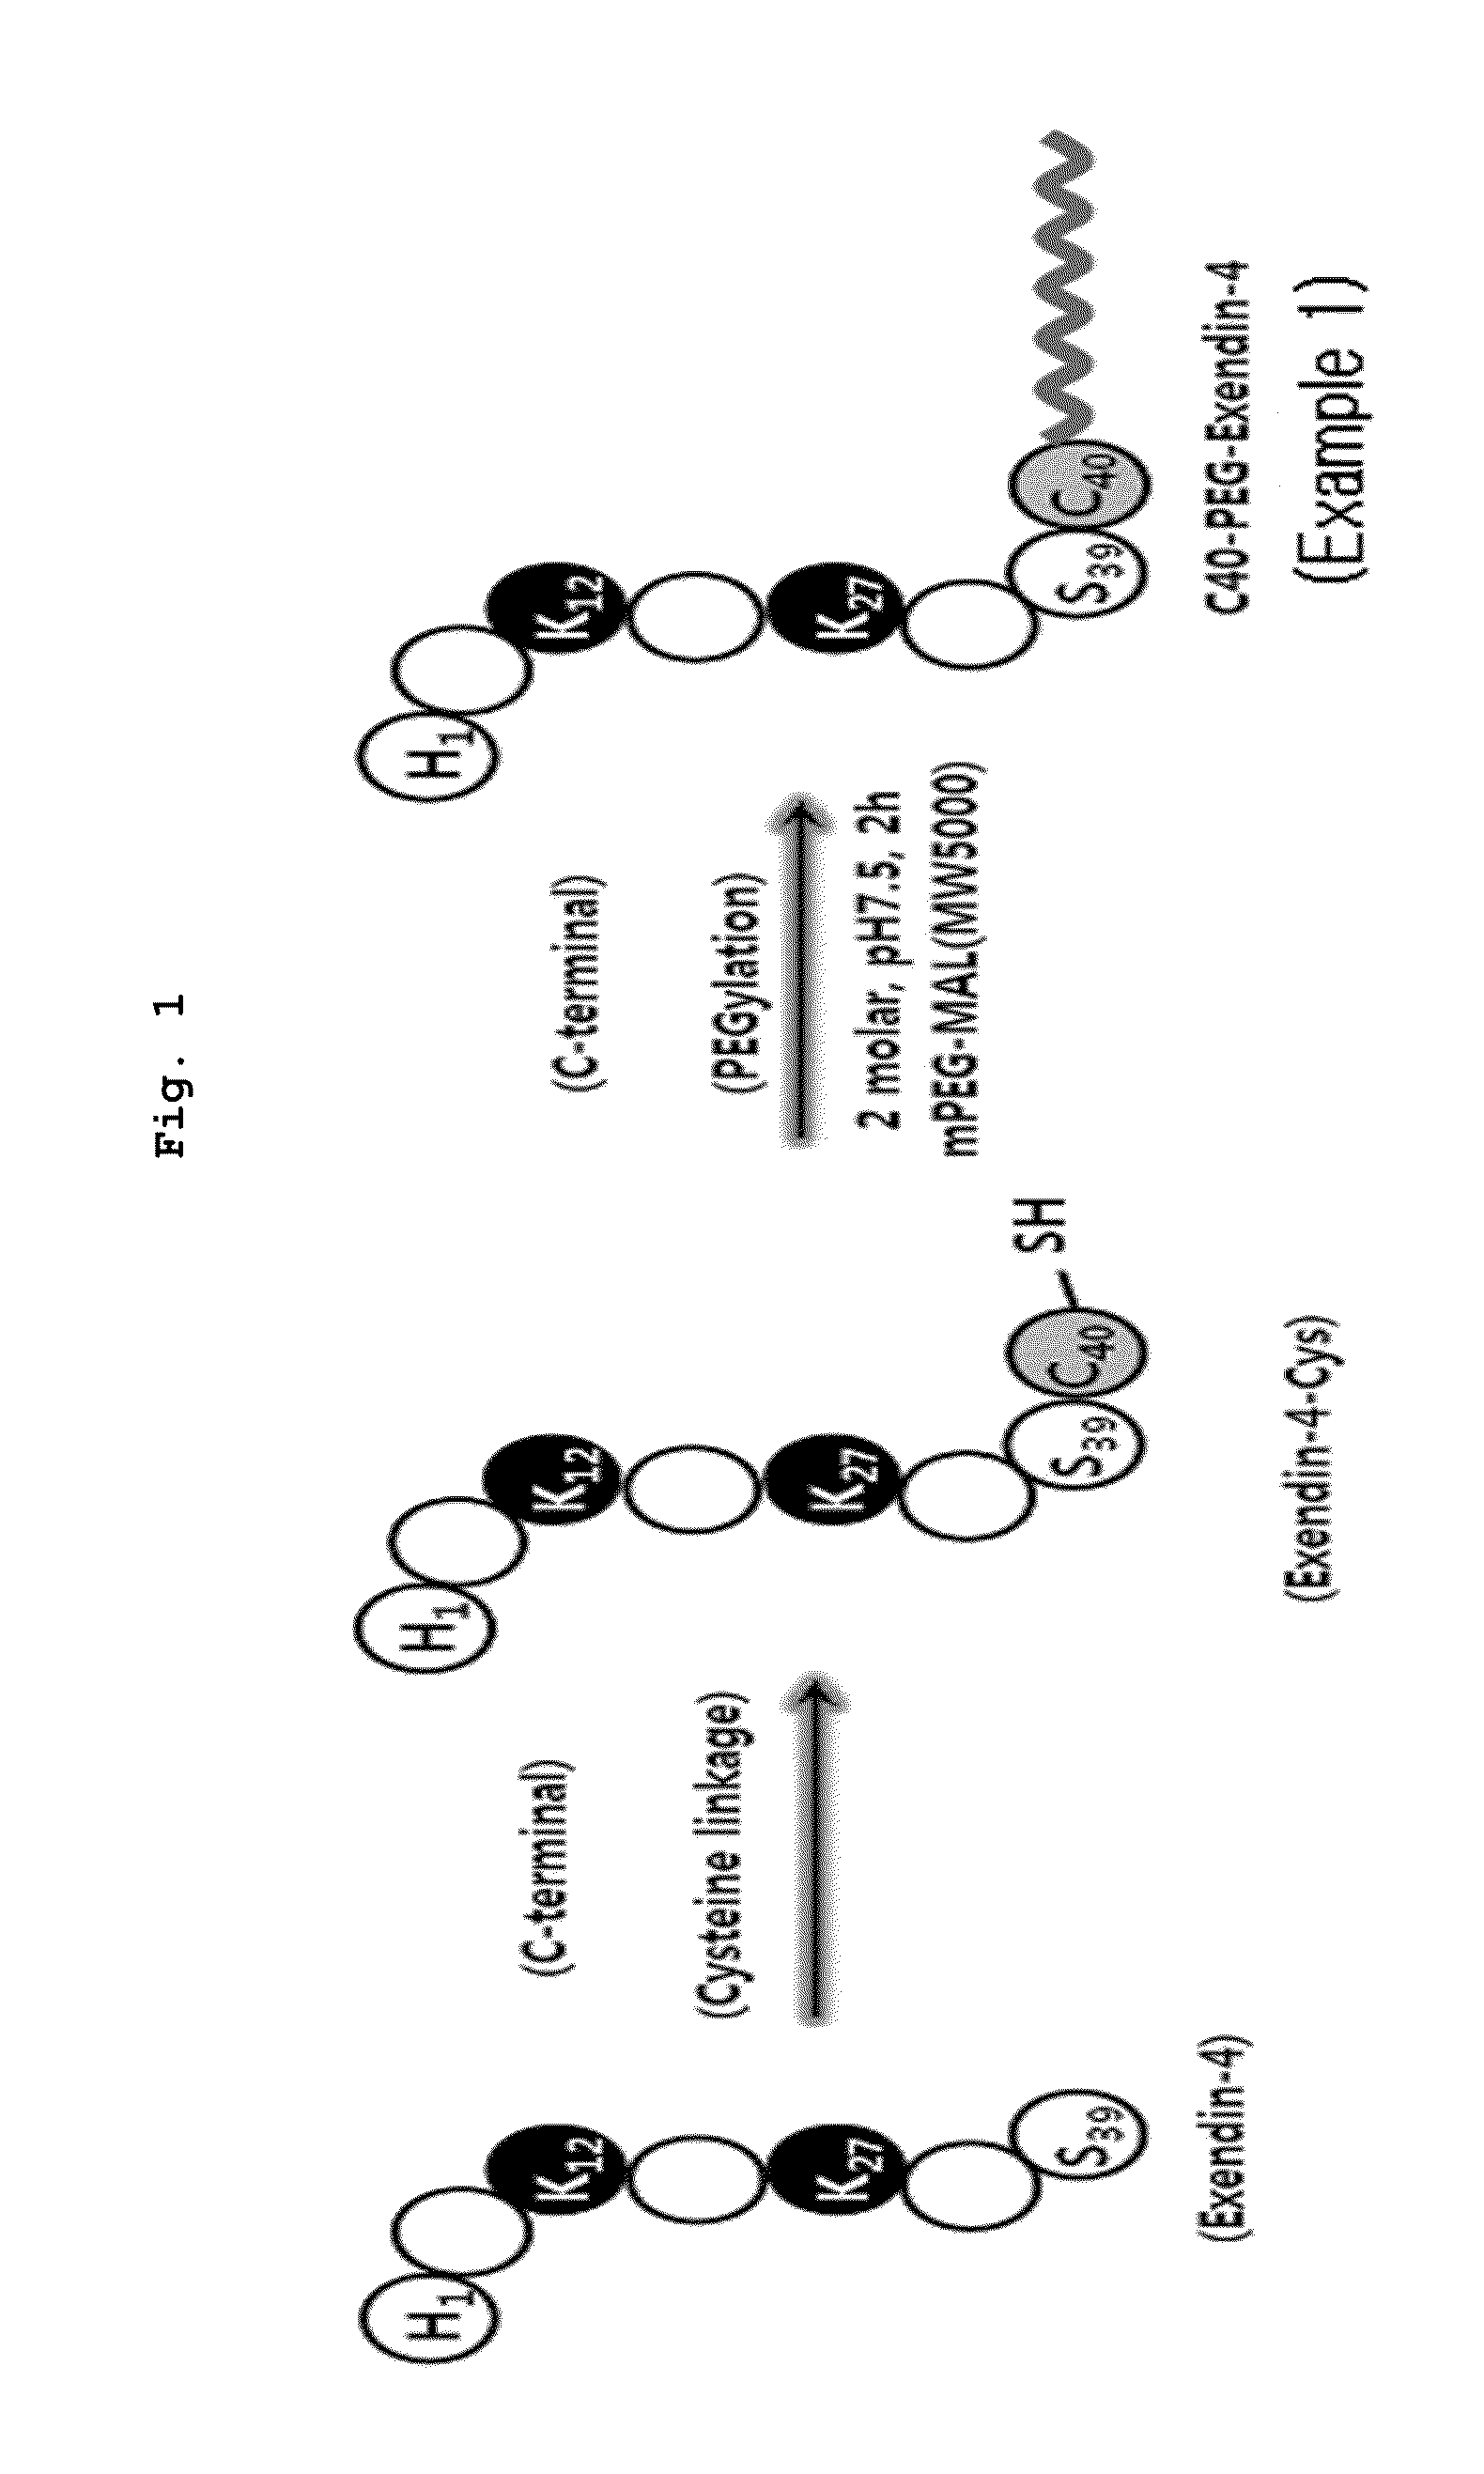 Exendin-4 analogue pegylated with polyethylene glycol or derivative thereof, preparation method thereof, and pharmaceutical compostion for preventing or treating diabetes, containing same as active ingredient